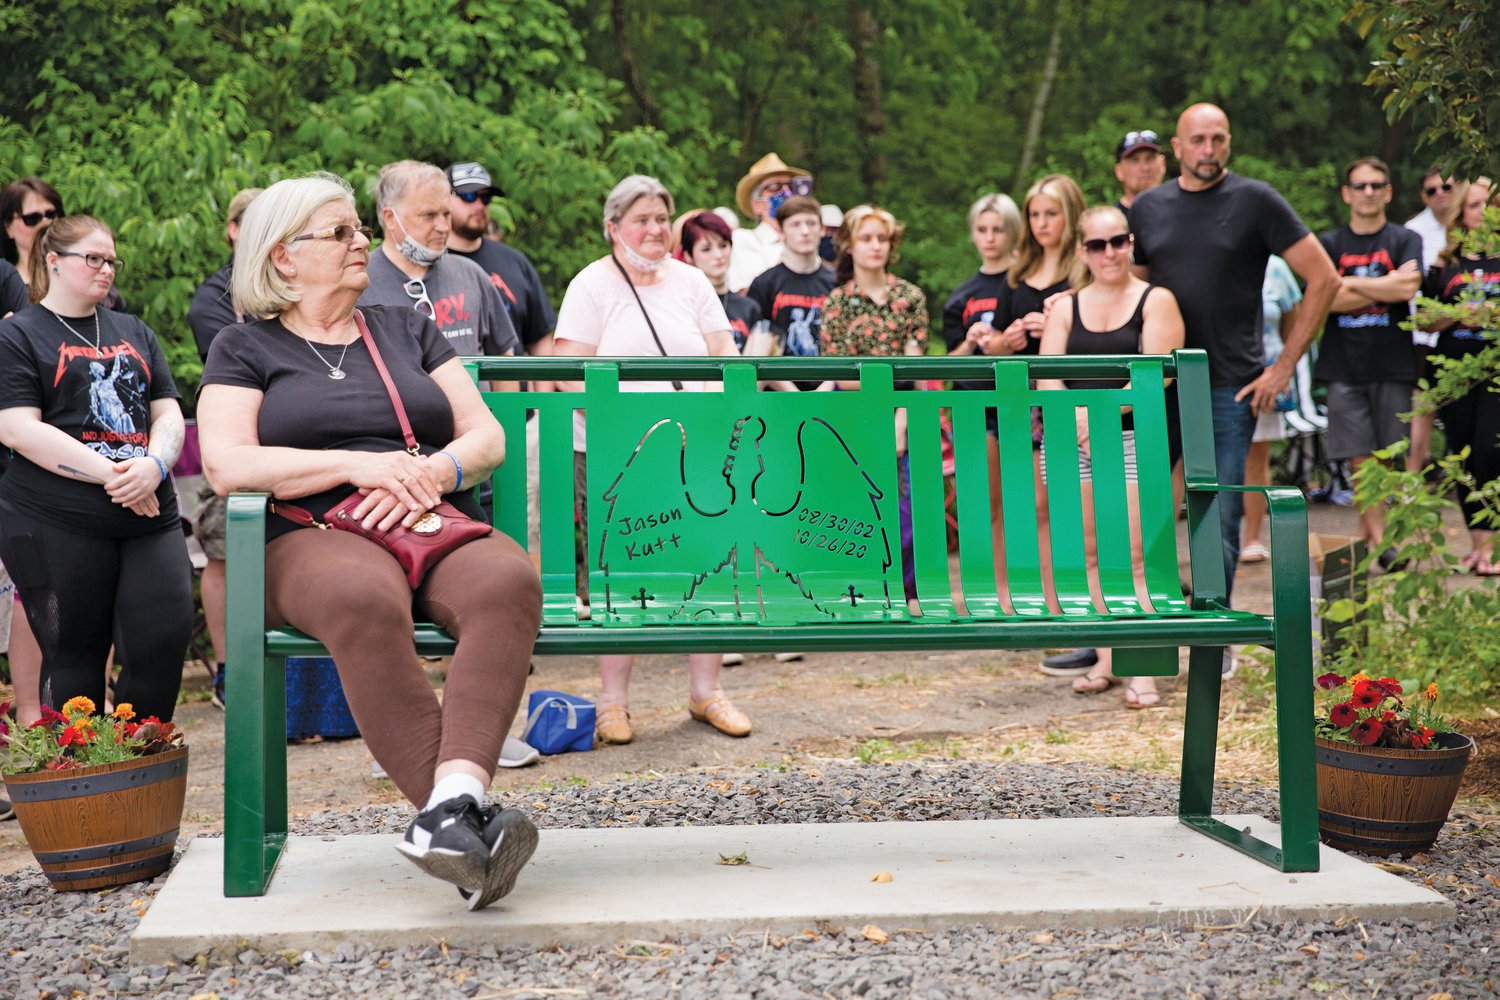 Family and friends of Jason Kutt, who was fatally shot at Lake Nockamixon last October, attend the dedication of a memorial bench created in his honor. Sitting on the bench is Toni Palmer of Perkasie, Jason’s grandmother.